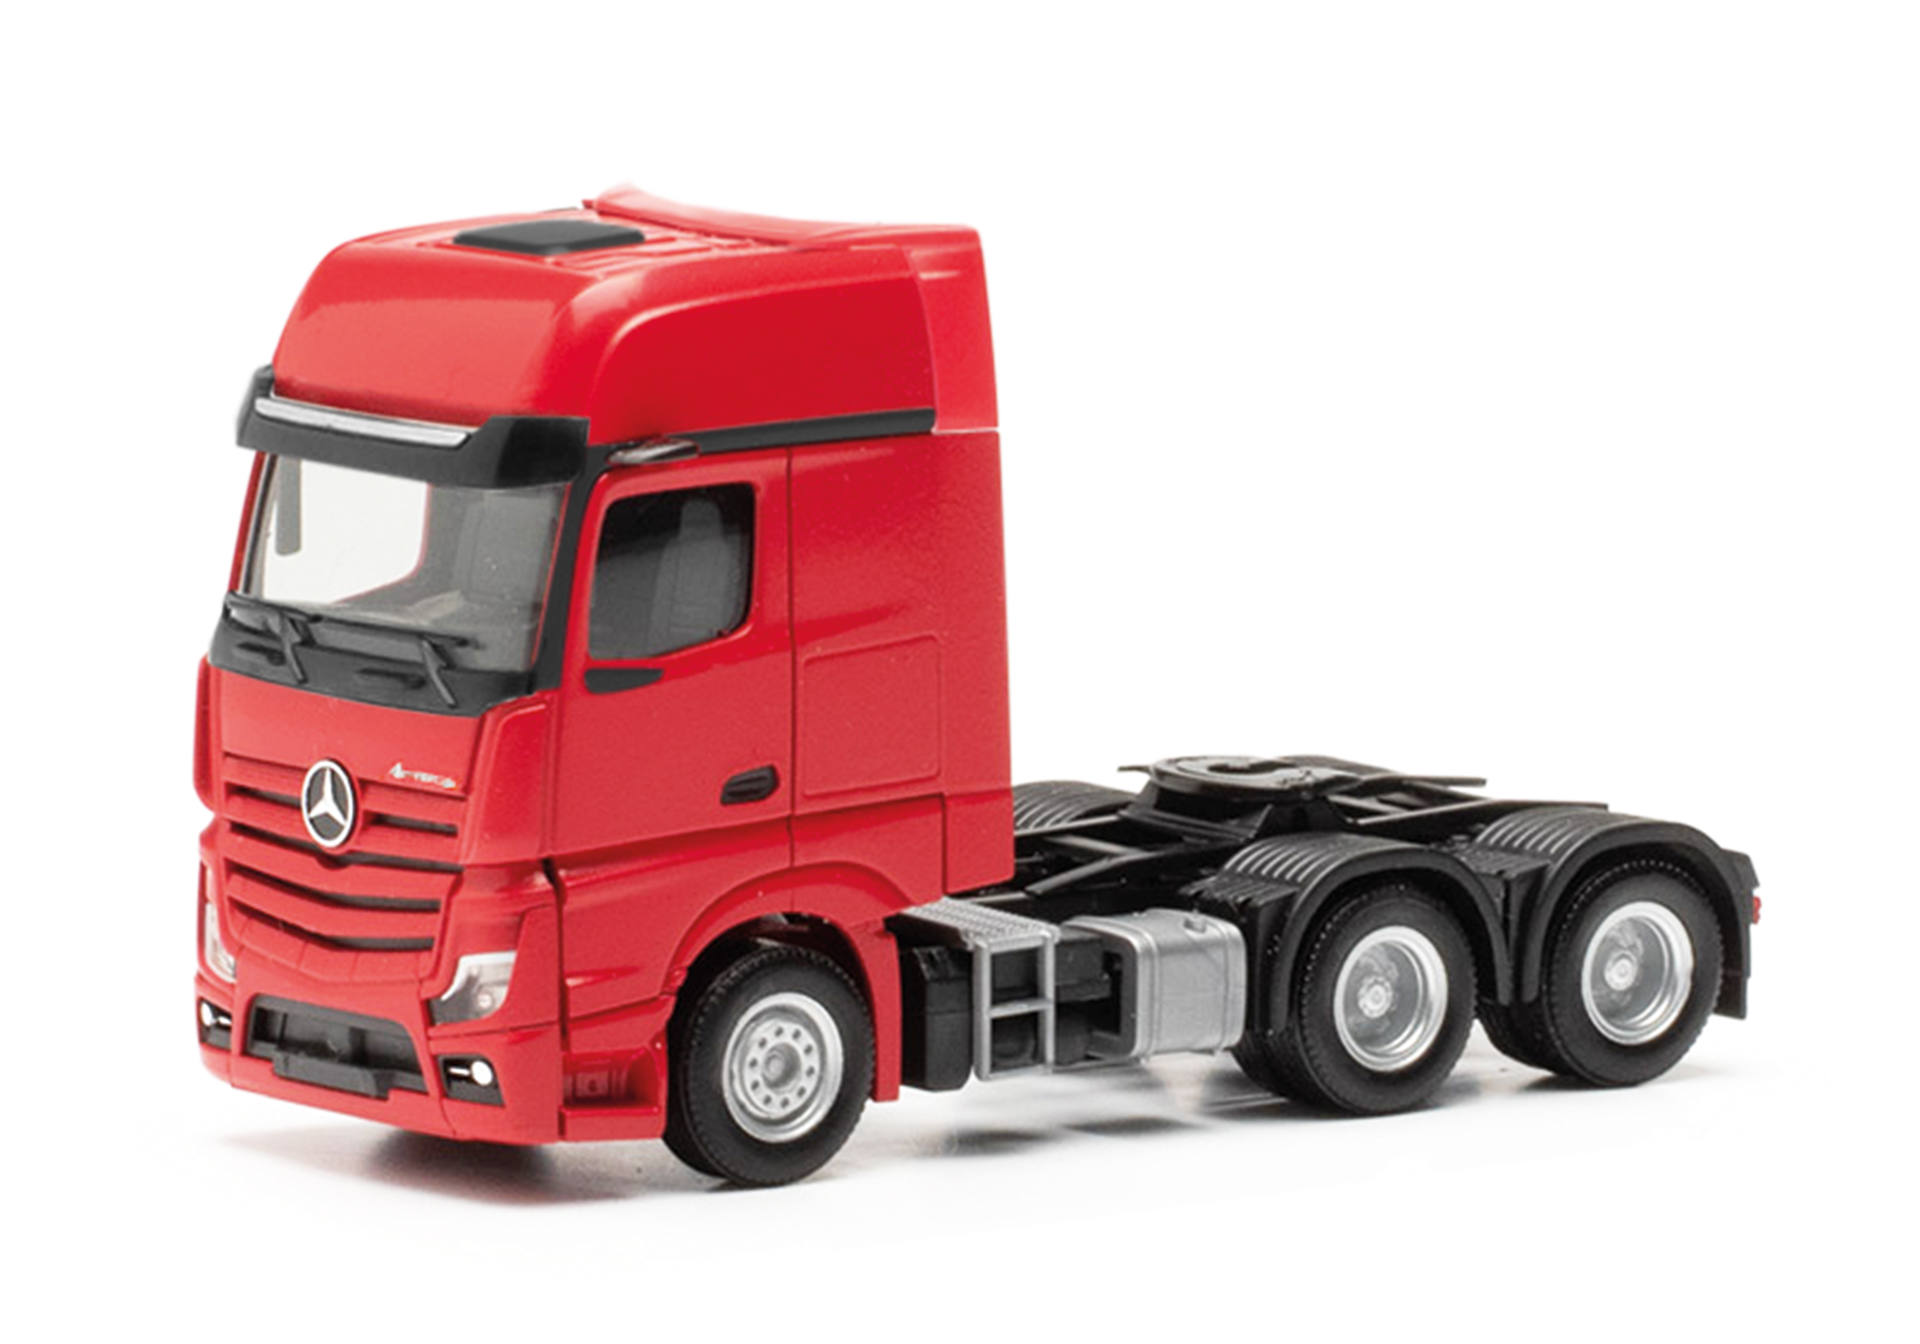 Mercedes-Benz Actros L Gigaspace Solozugmaschine 3achs (6x4), rot